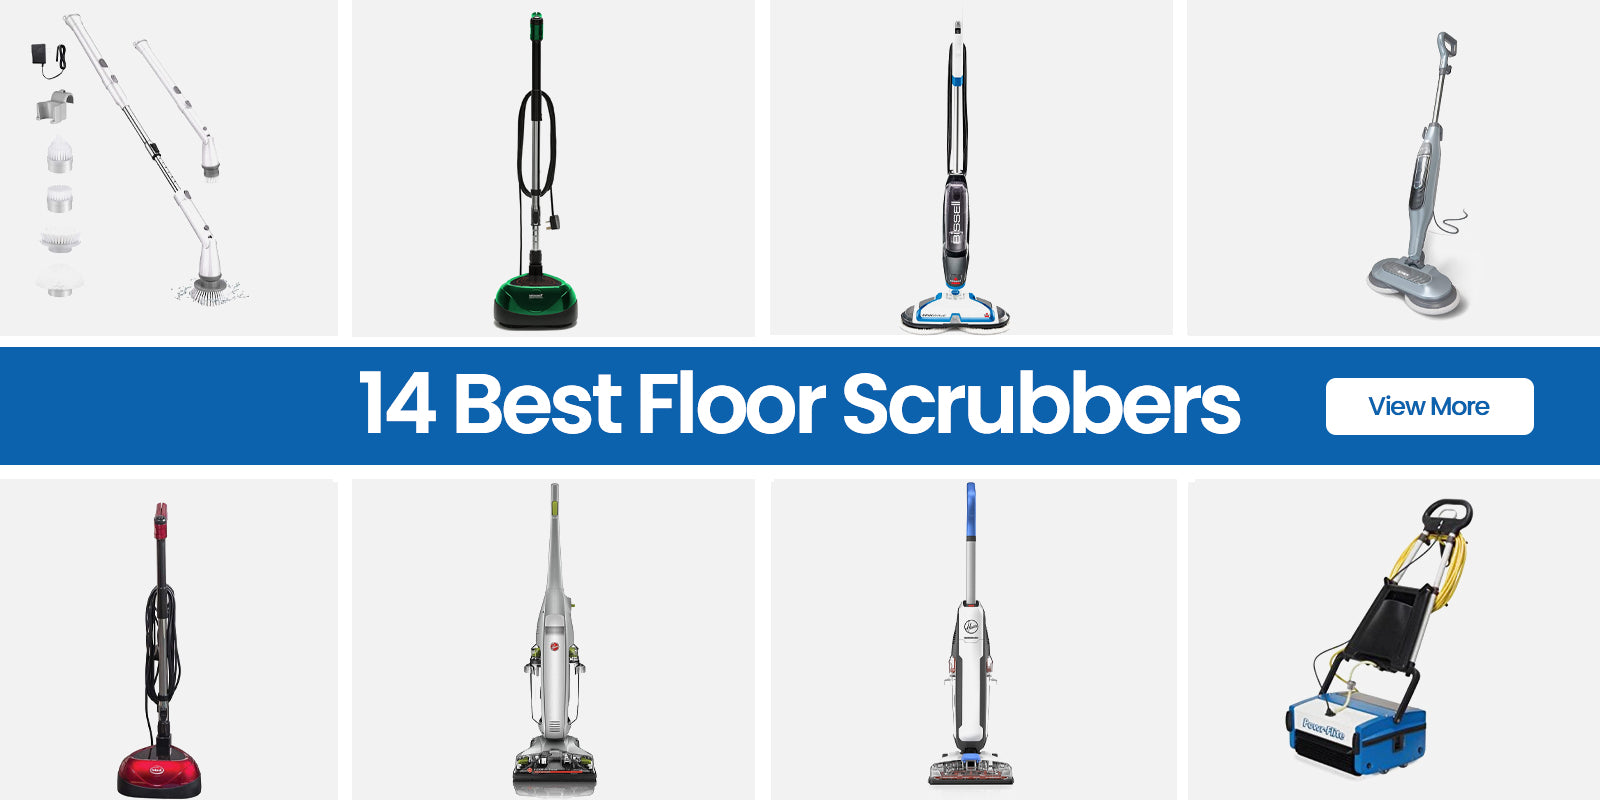 Types Of Scrubbers & Where To Use Them? - Mishry (2023)